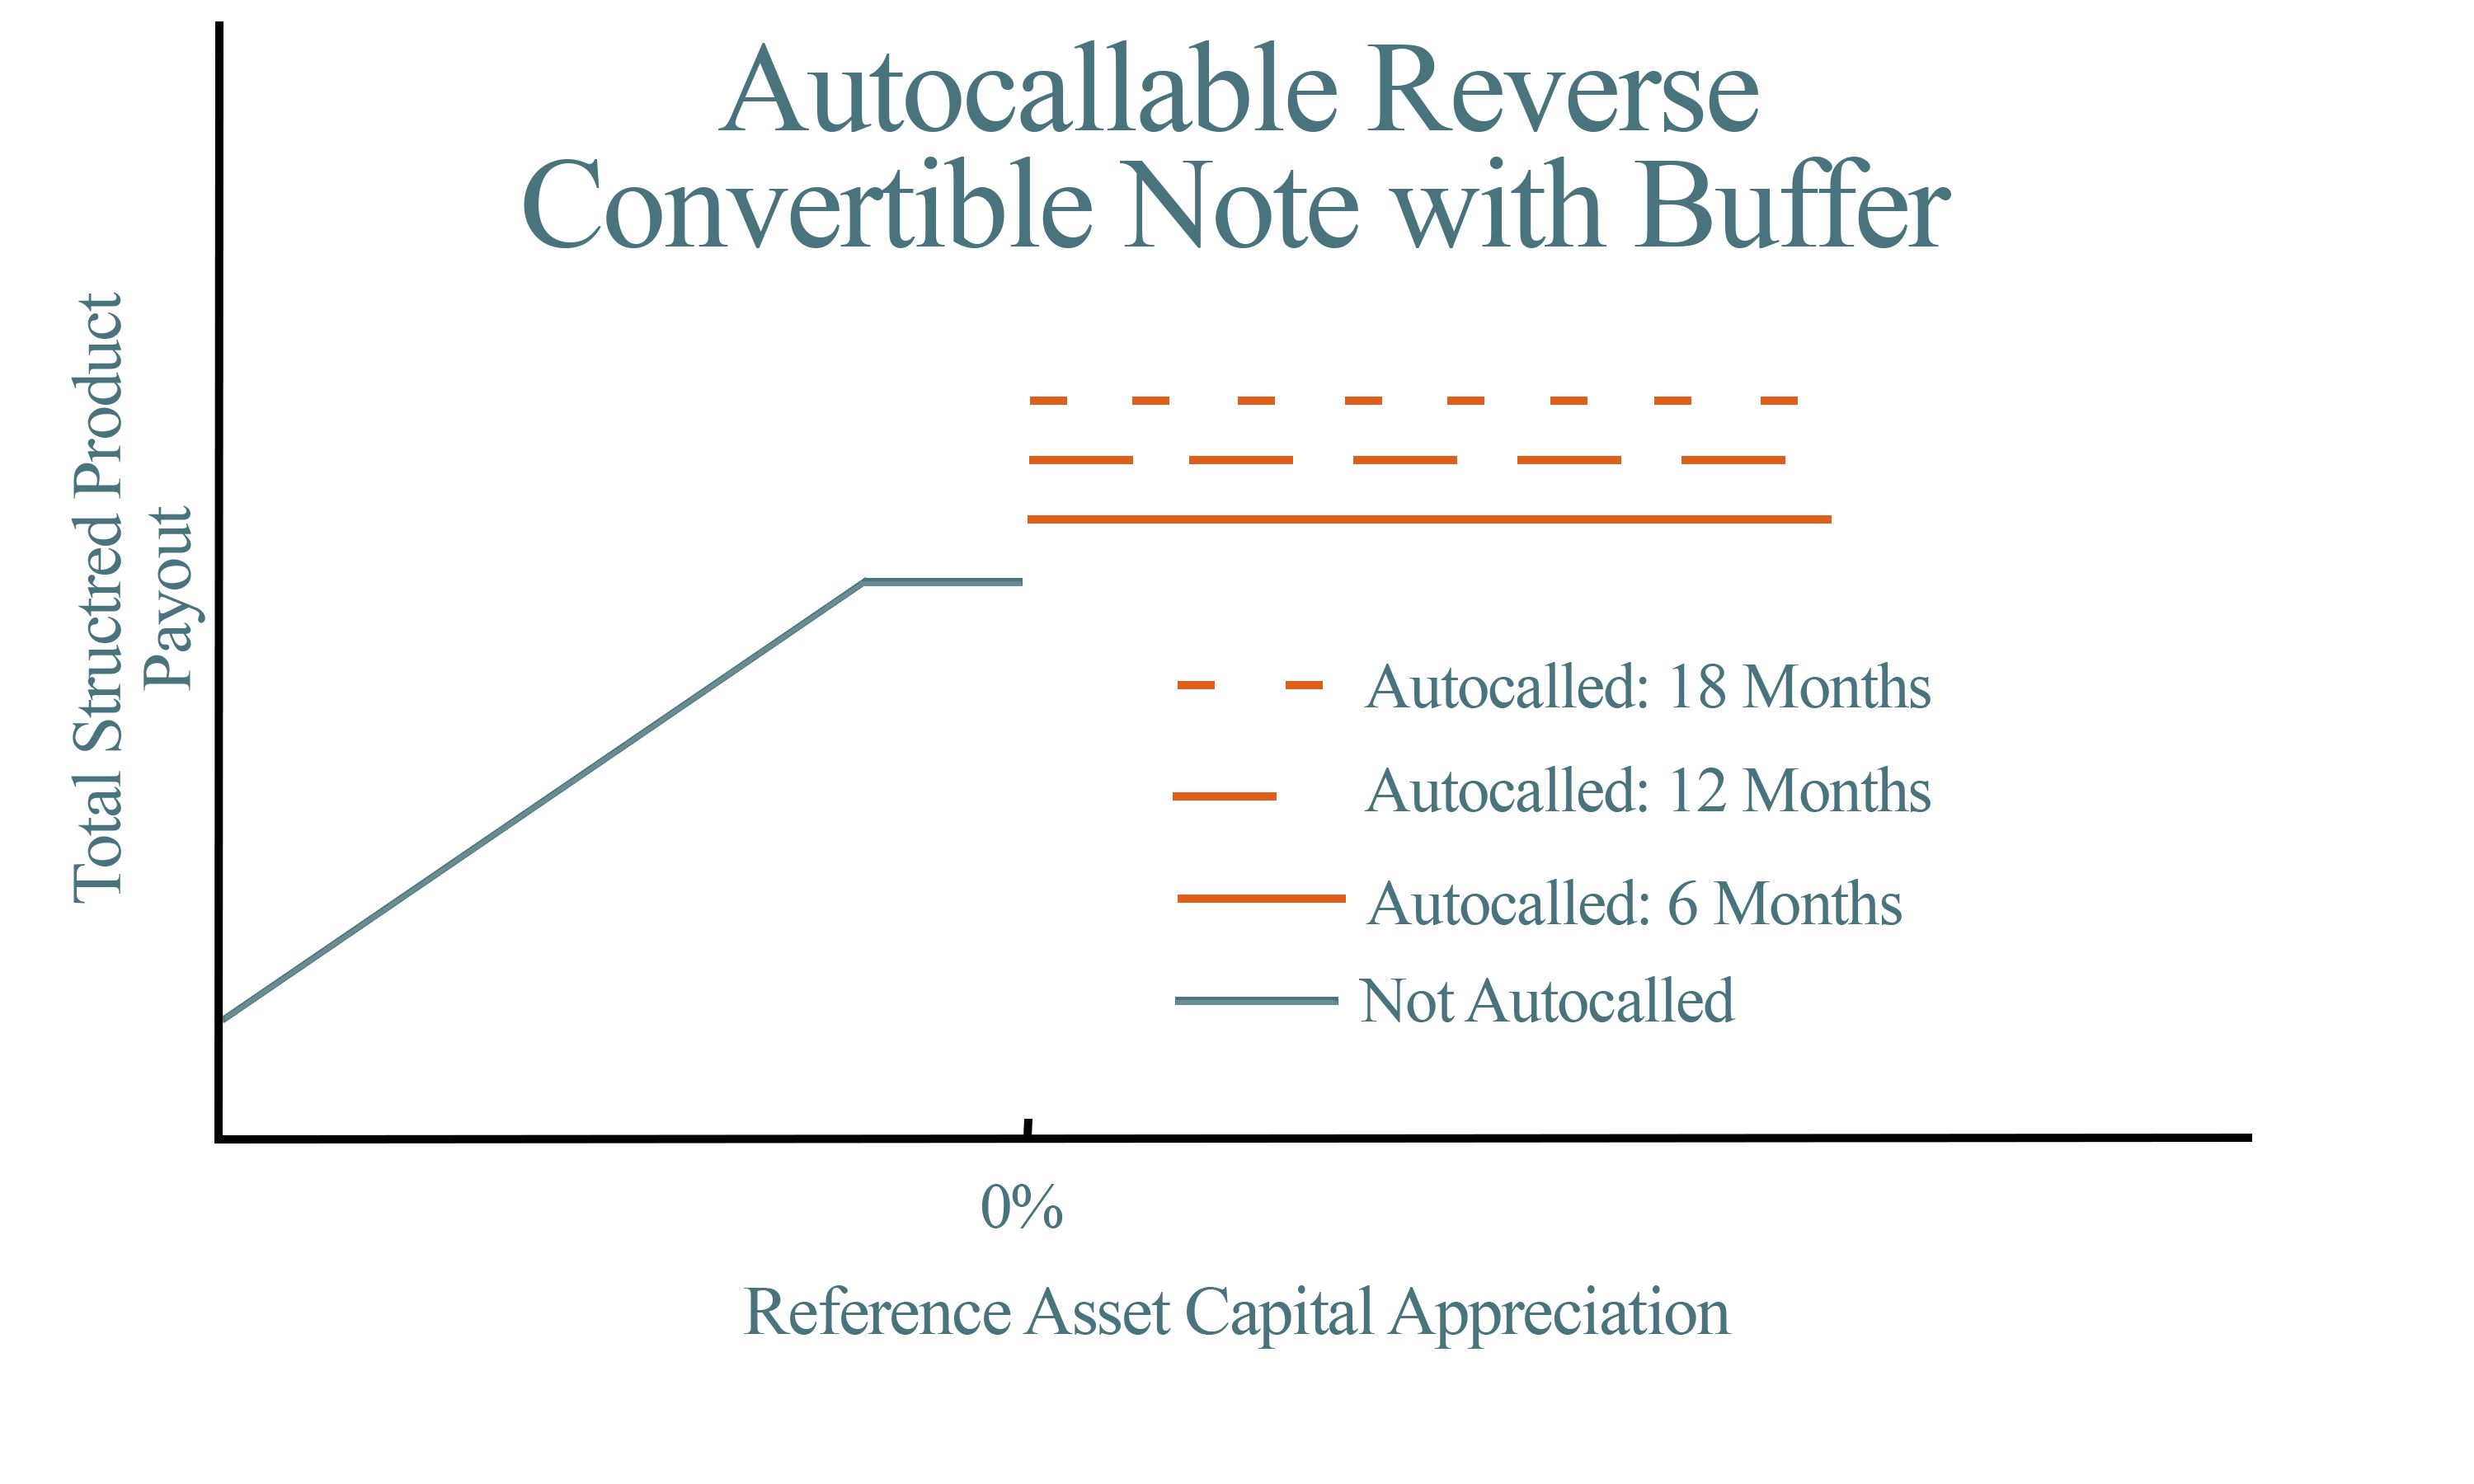 A graph demonstrating payout over capital appreciation for Autocallable Reverse Convertibles with Buffer